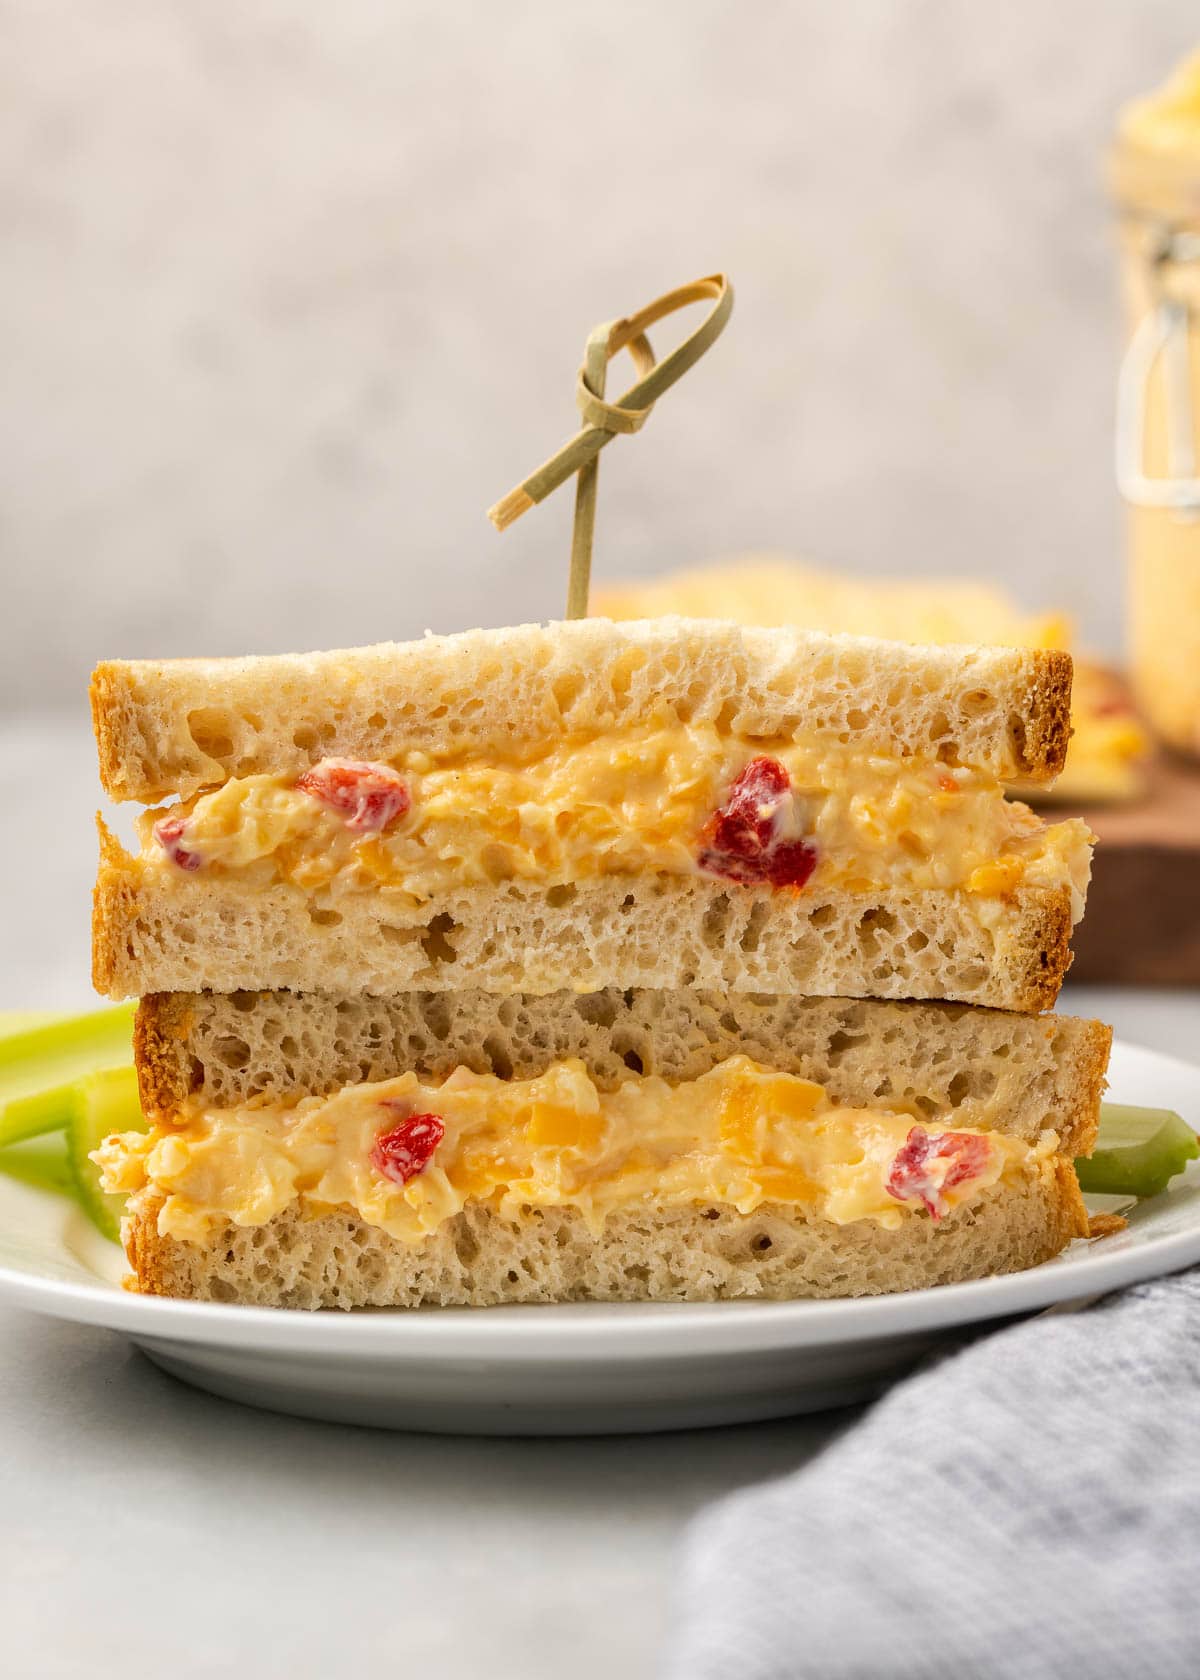 Pimento cheese sandwich on a white plate